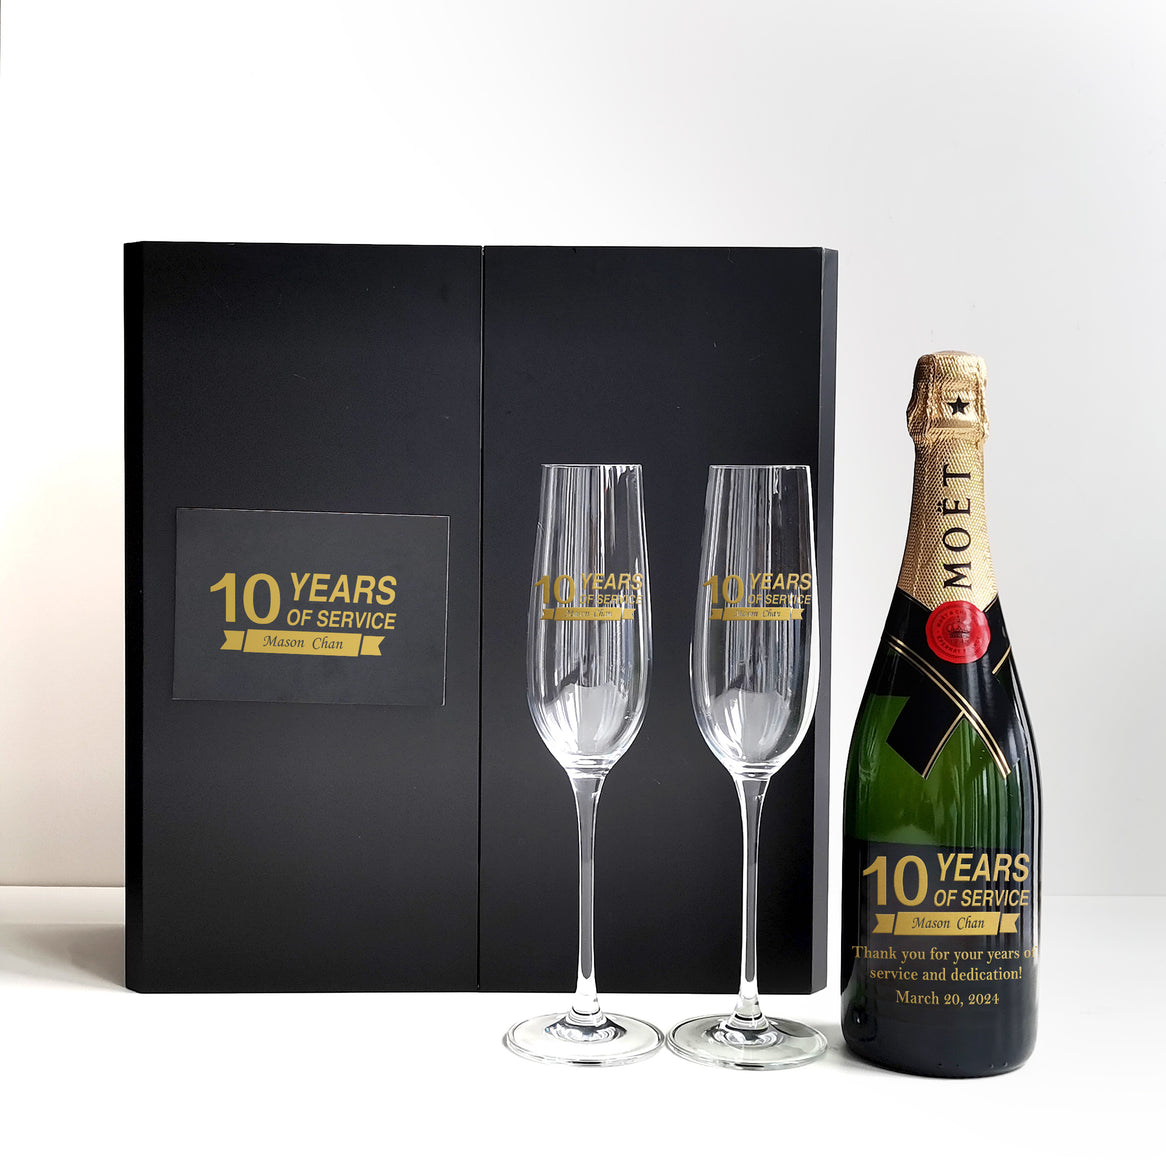 corporate gifts|Moët & Chandon Impérial & Champagne Glasses Gift Set - Design Your Own Wine